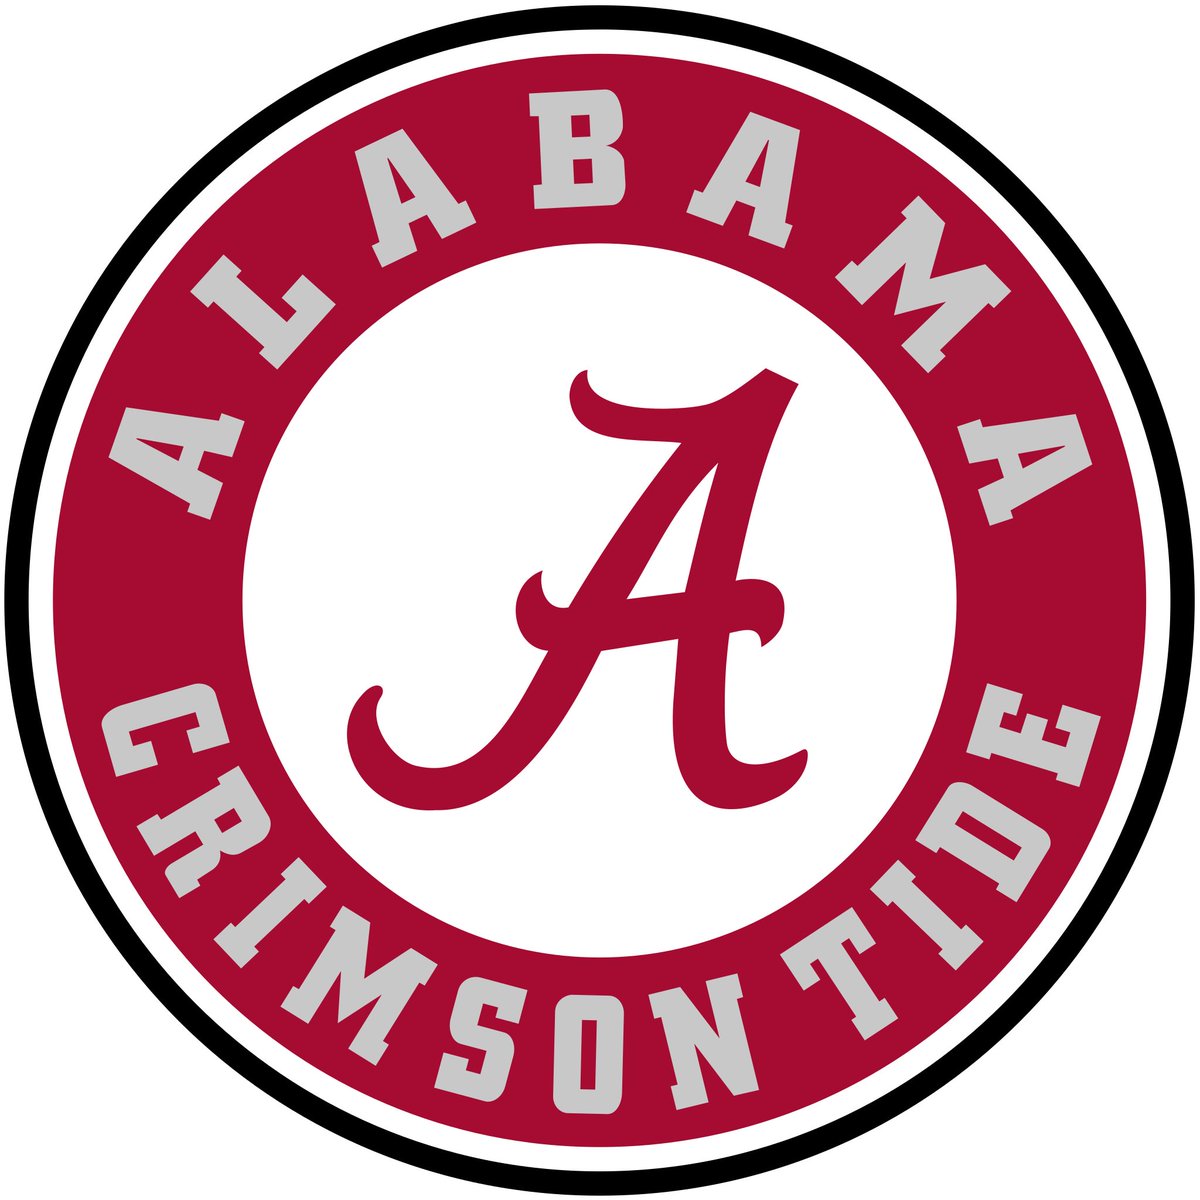 ALL GLORY TO GOD!! Blessed to receive an offer from The University of Alabama! @MDFootball @KalenDeBoer @BryanEllisUA @BraxtonBarker_7 @CoachShephard